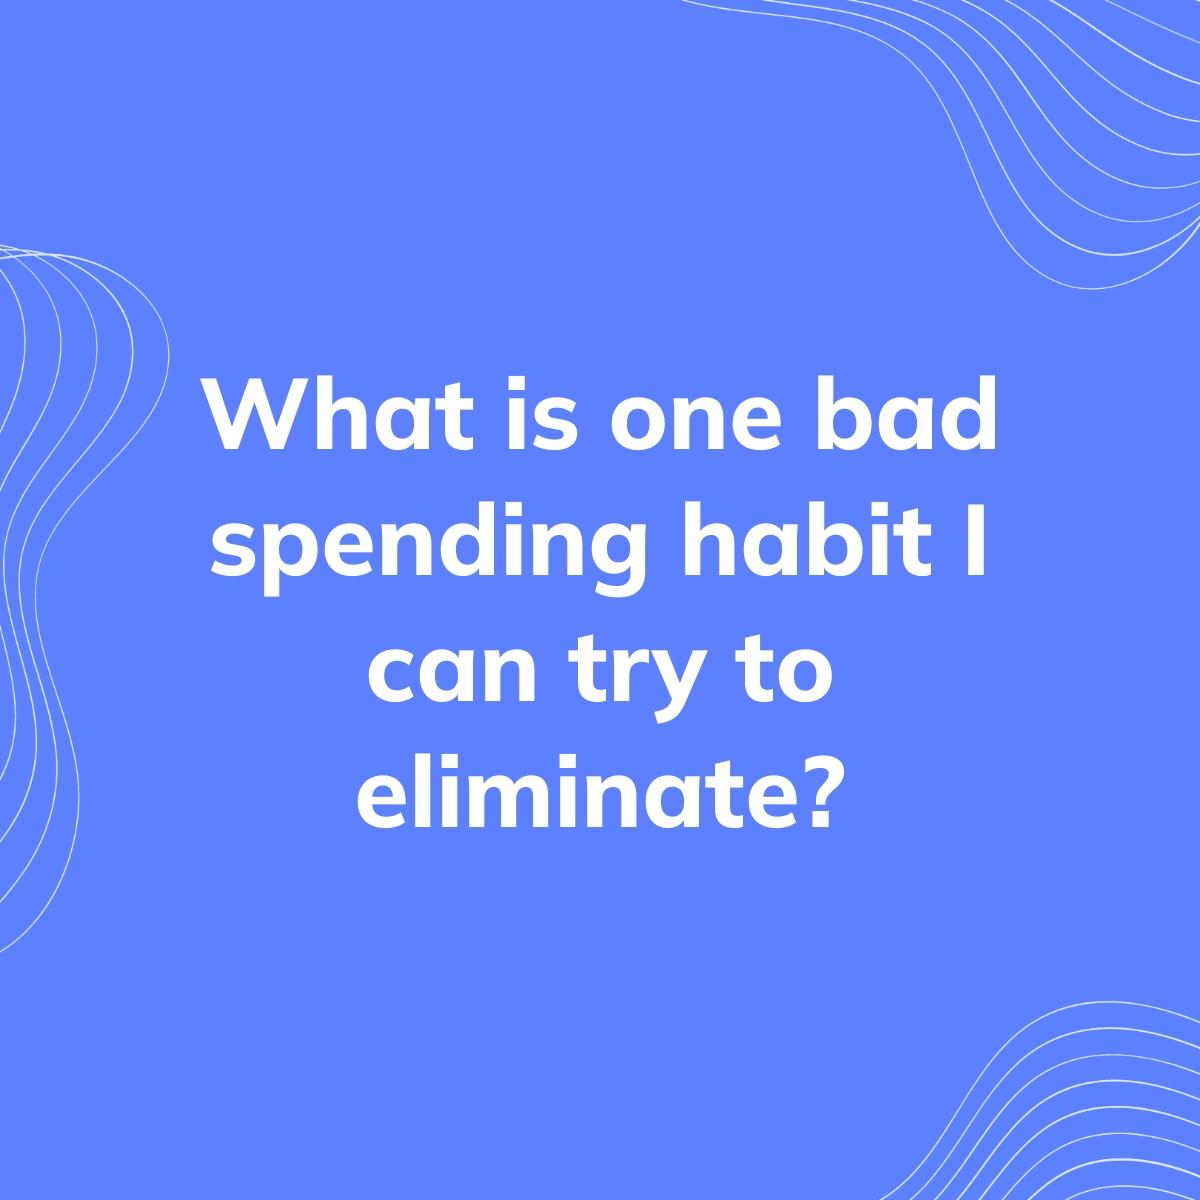 Journal Prompt: What is one bad spending habit I can try to eliminate?